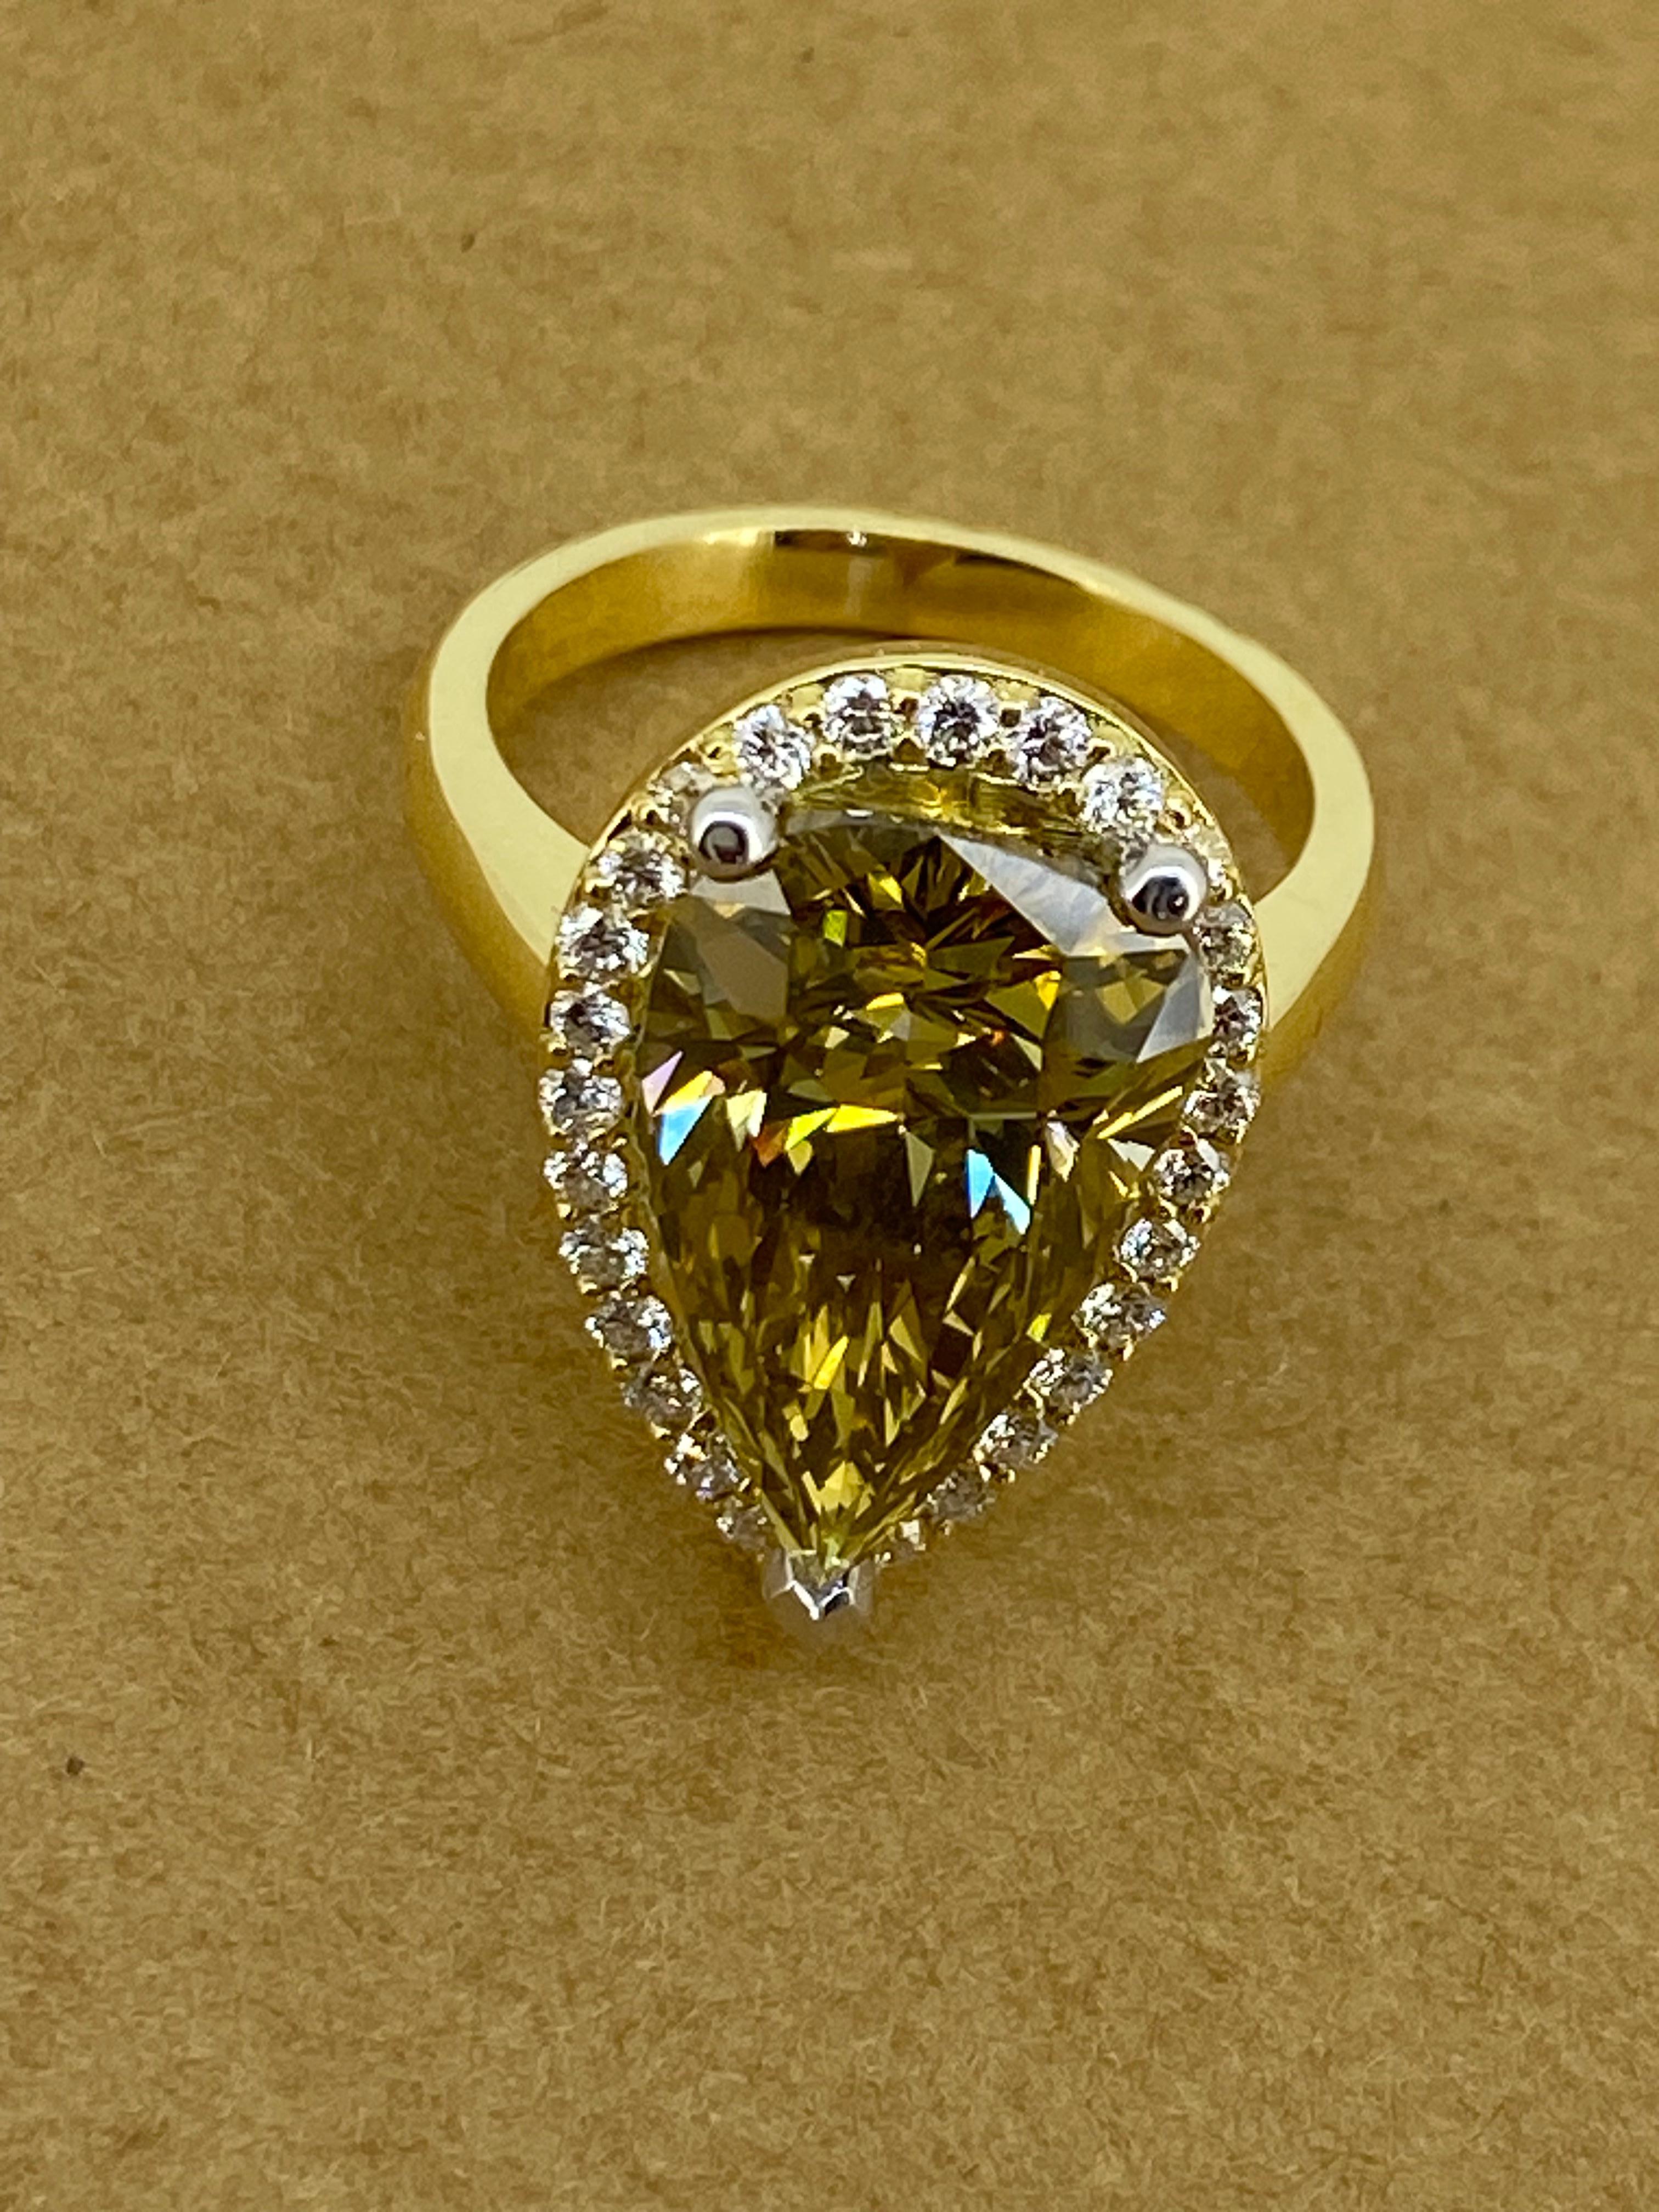 6.36ct Fancy Brownish Yellow Natural Pear Cut Diamond Ring in 18K Yellow Gold For Sale 1